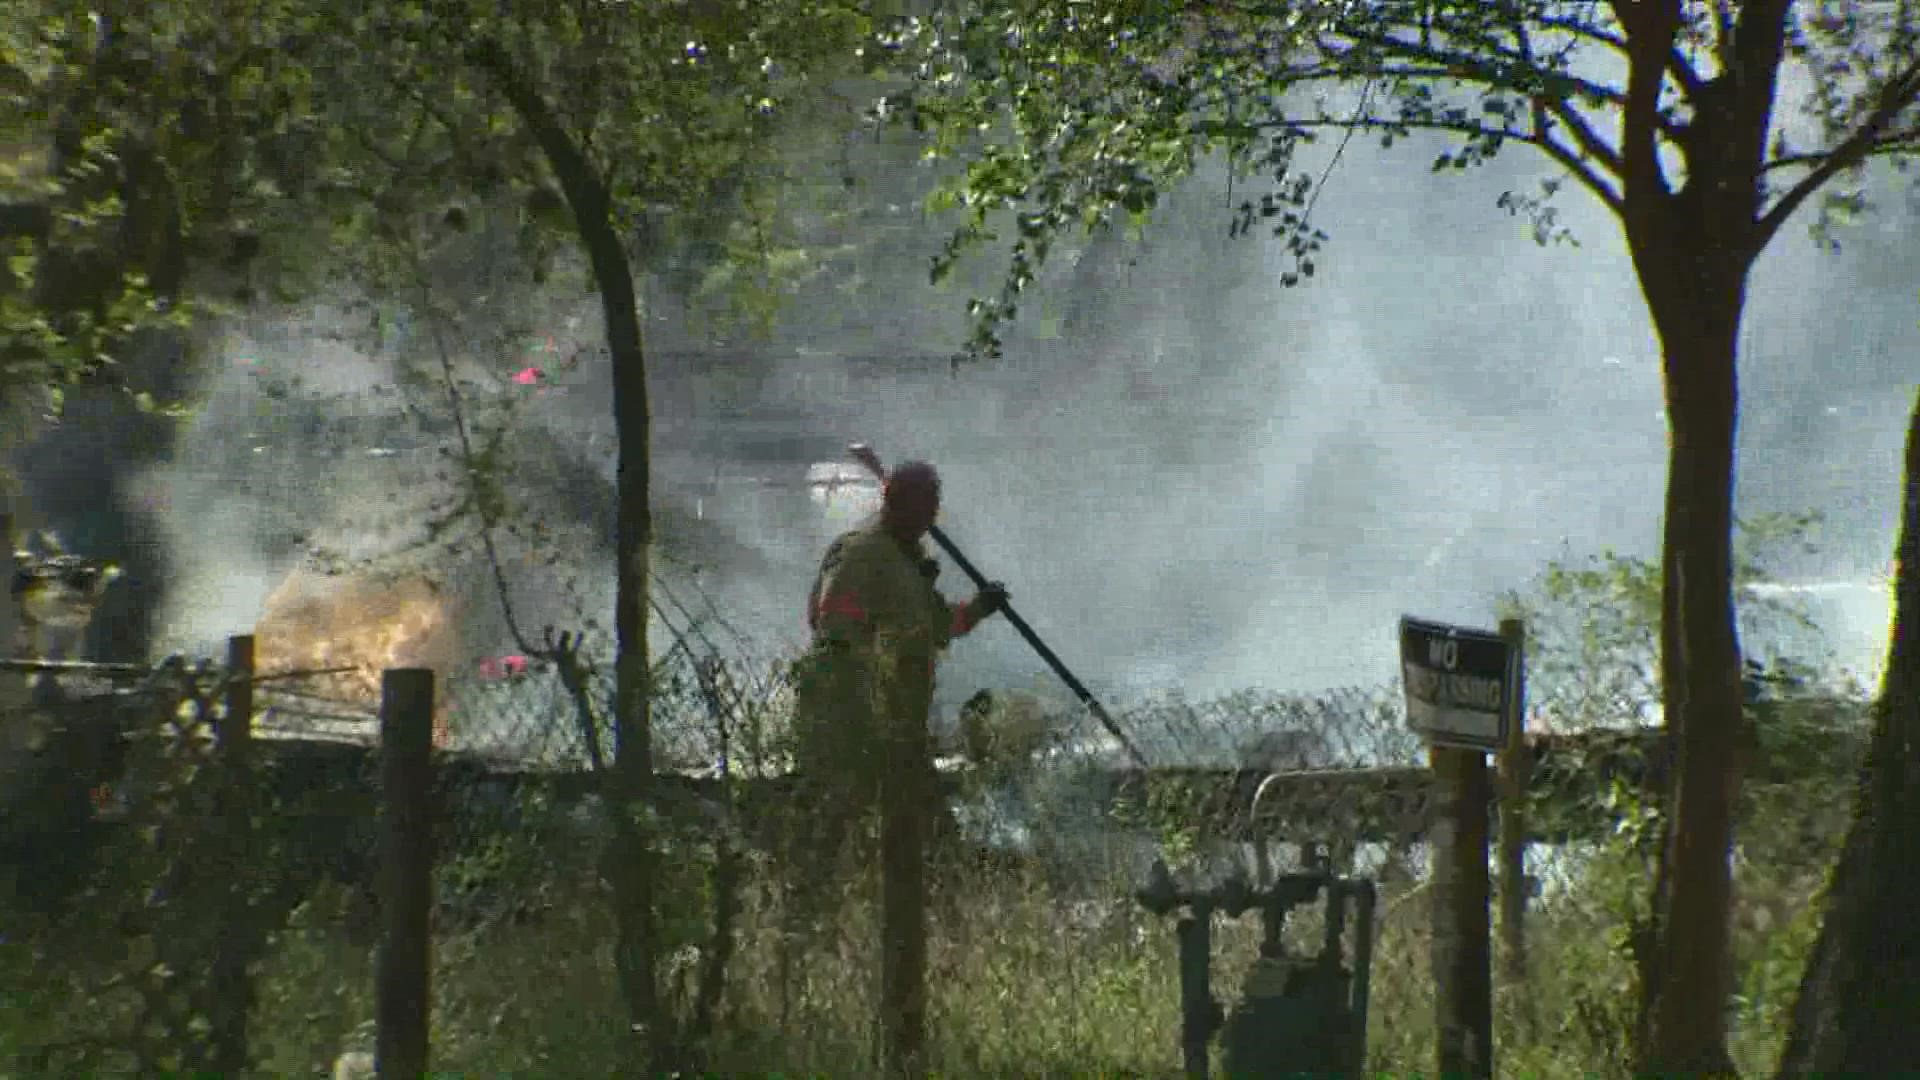 A home went up in flames on Thursday morning, at the corner of Ladd Road and Sixth Street.